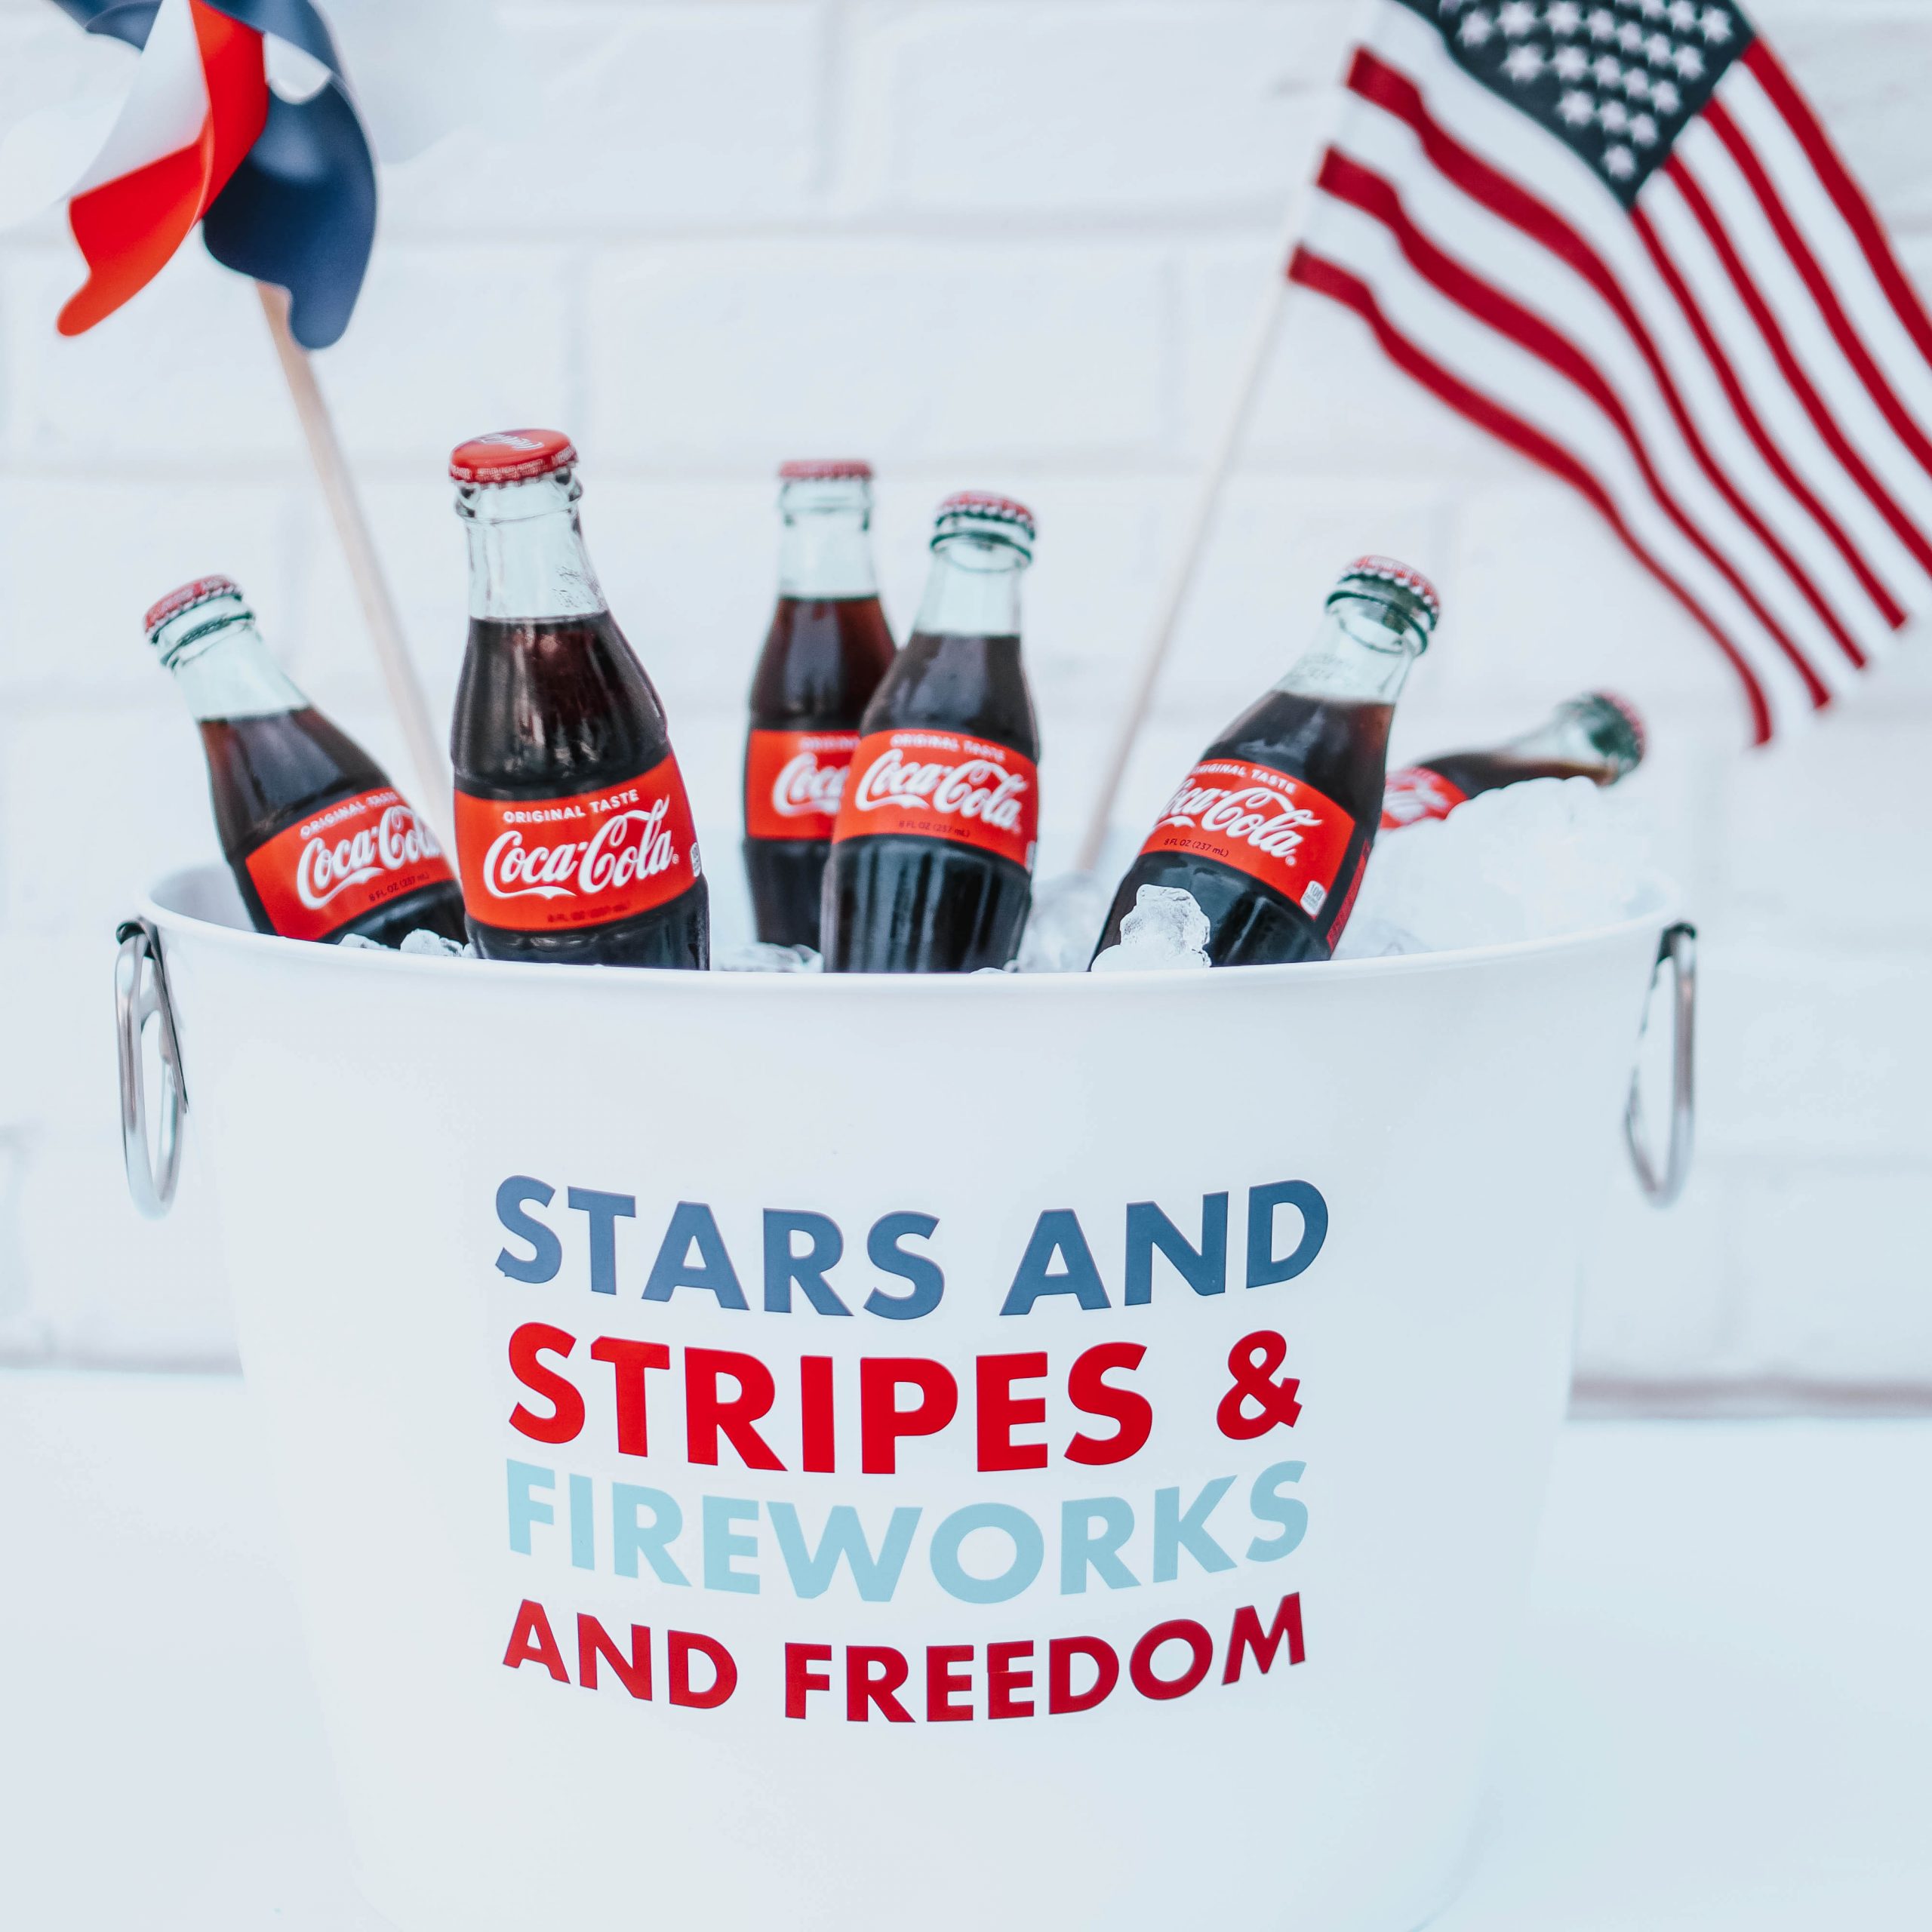 DIY July Fourth Party Idea – How To Apply Adhesive Vinyl To A Metal Beverage Tub